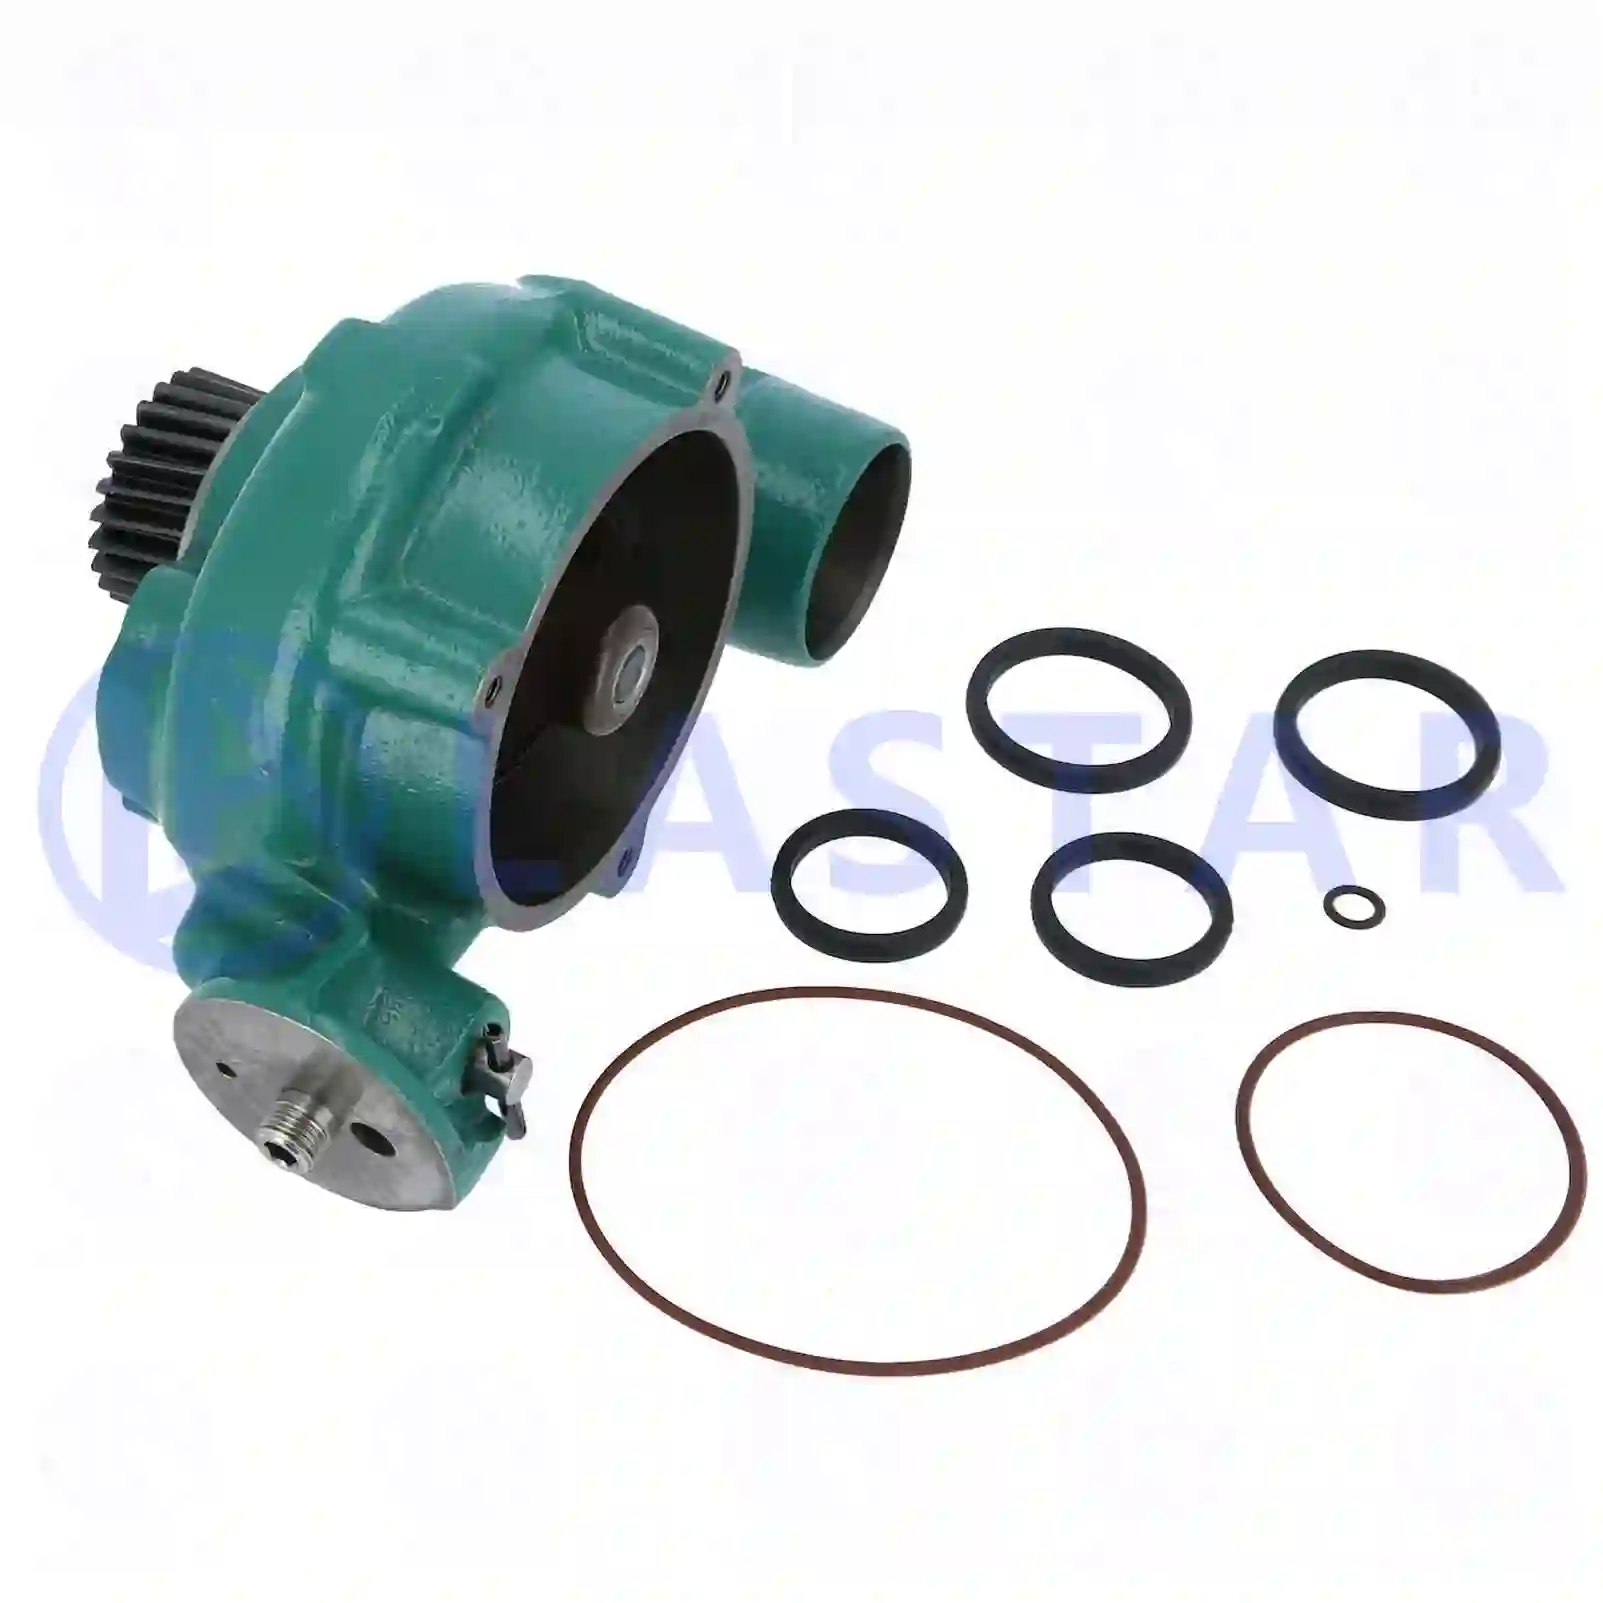 Water pump, for vehicles without retarder, 77708760, 1001698, 1547155, 8112275, 8112555, 8112775, 8113117, 8148460, 8149941, ZG00760-0008 ||  77708760 Lastar Spare Part | Truck Spare Parts, Auotomotive Spare Parts Water pump, for vehicles without retarder, 77708760, 1001698, 1547155, 8112275, 8112555, 8112775, 8113117, 8148460, 8149941, ZG00760-0008 ||  77708760 Lastar Spare Part | Truck Spare Parts, Auotomotive Spare Parts